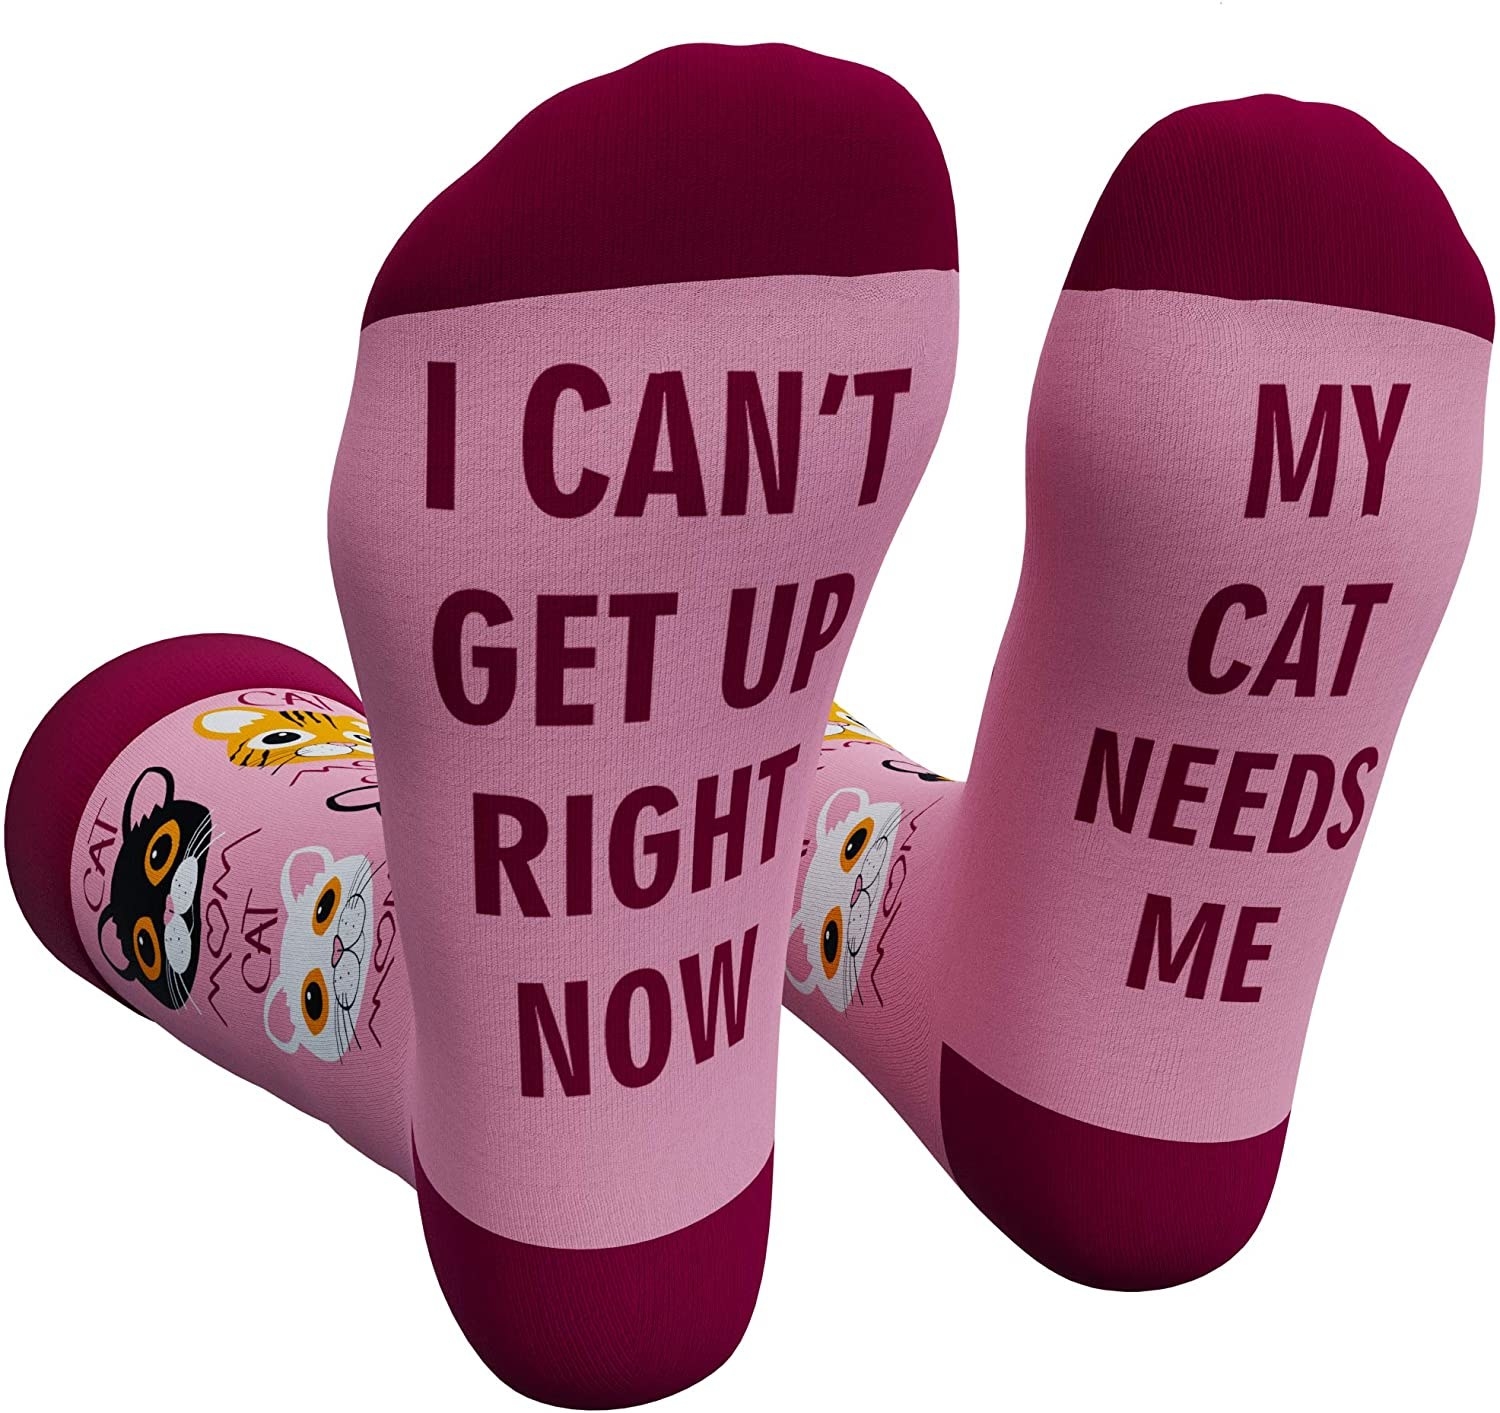 Pink and red socks with pictures of cats and the words &quot;Cat Mom&quot; on the legs, and &quot;I Can&#x27;t Get Up Right Now&quot; on the bottom of right foot, and &quot;My Cat Needs Me&quot; on the bottom of left foot